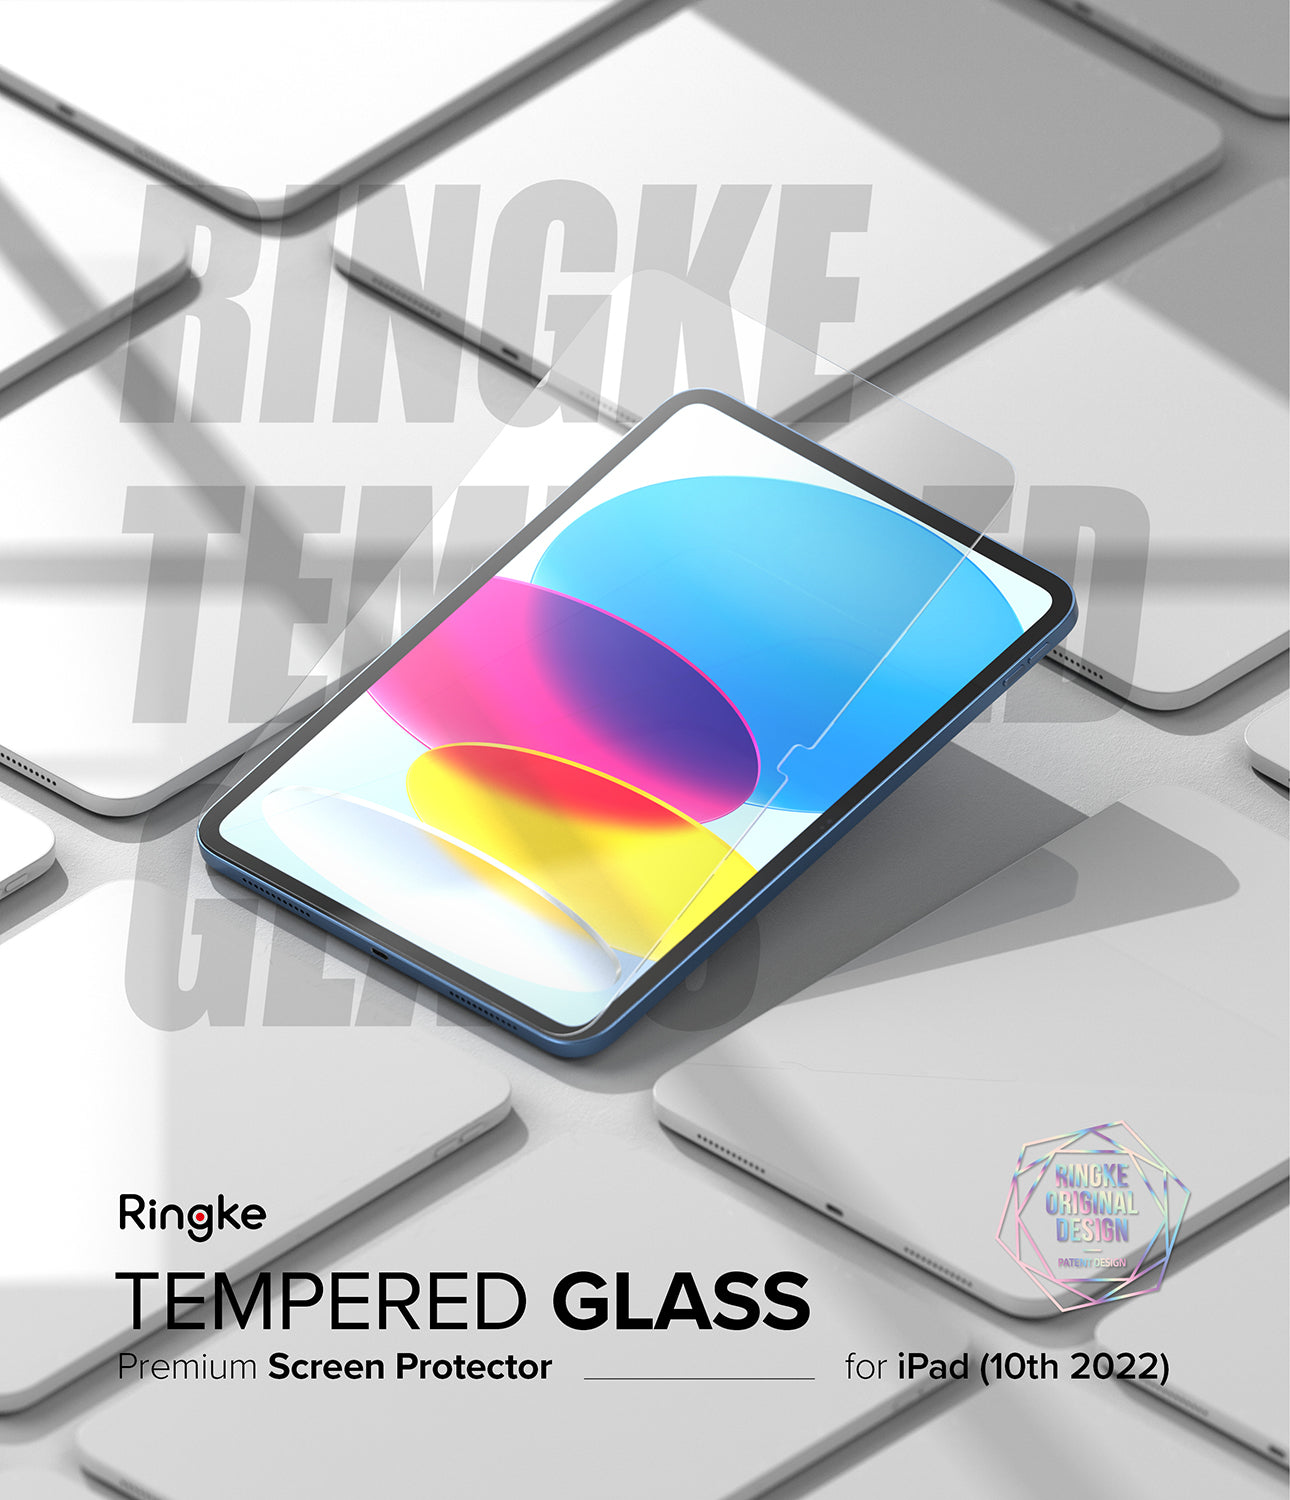 Tempered Glass - Premium Screen Protector for iPad (10th 2022)